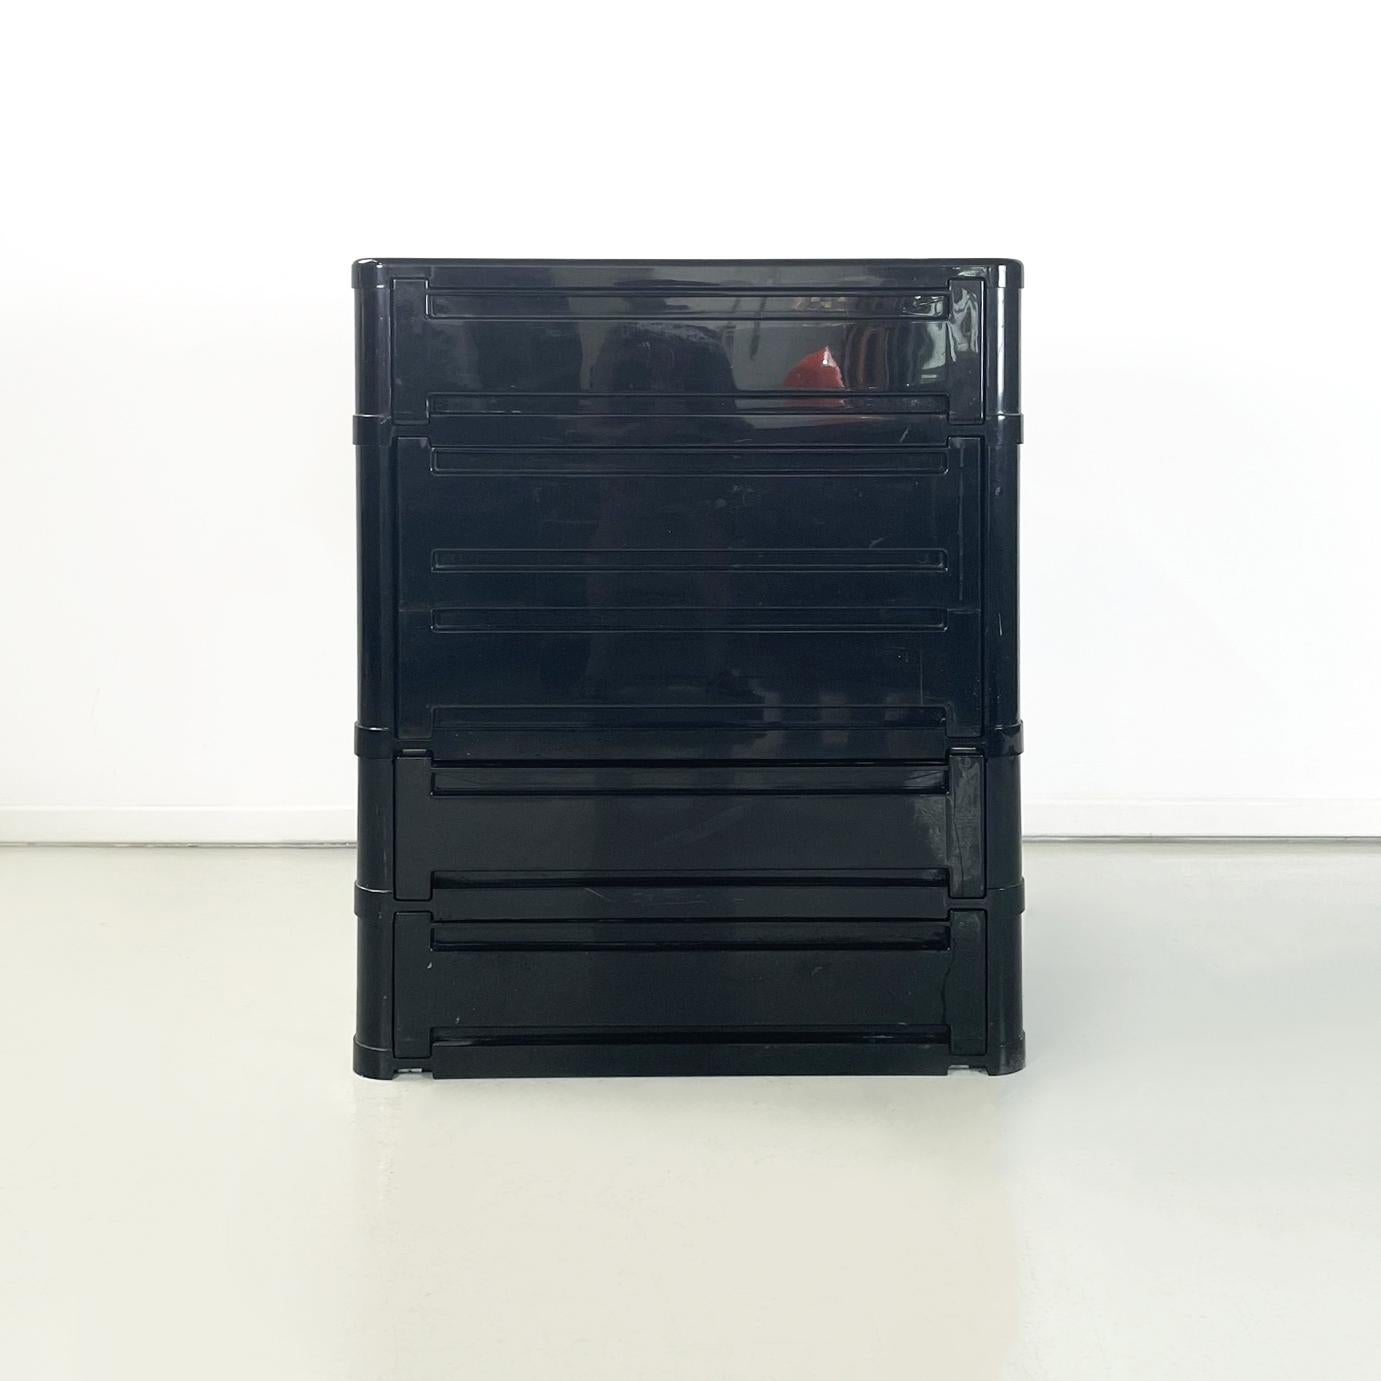 Italian space age modular chest of drawer 4964 in black plastic by Olaf Von Boh for Kartell, 1970s
Modular chest of drawers mod. 4964 with a rectangular base with rounded corners, in black plastic. The shoe rack is made up of 4 modules and each